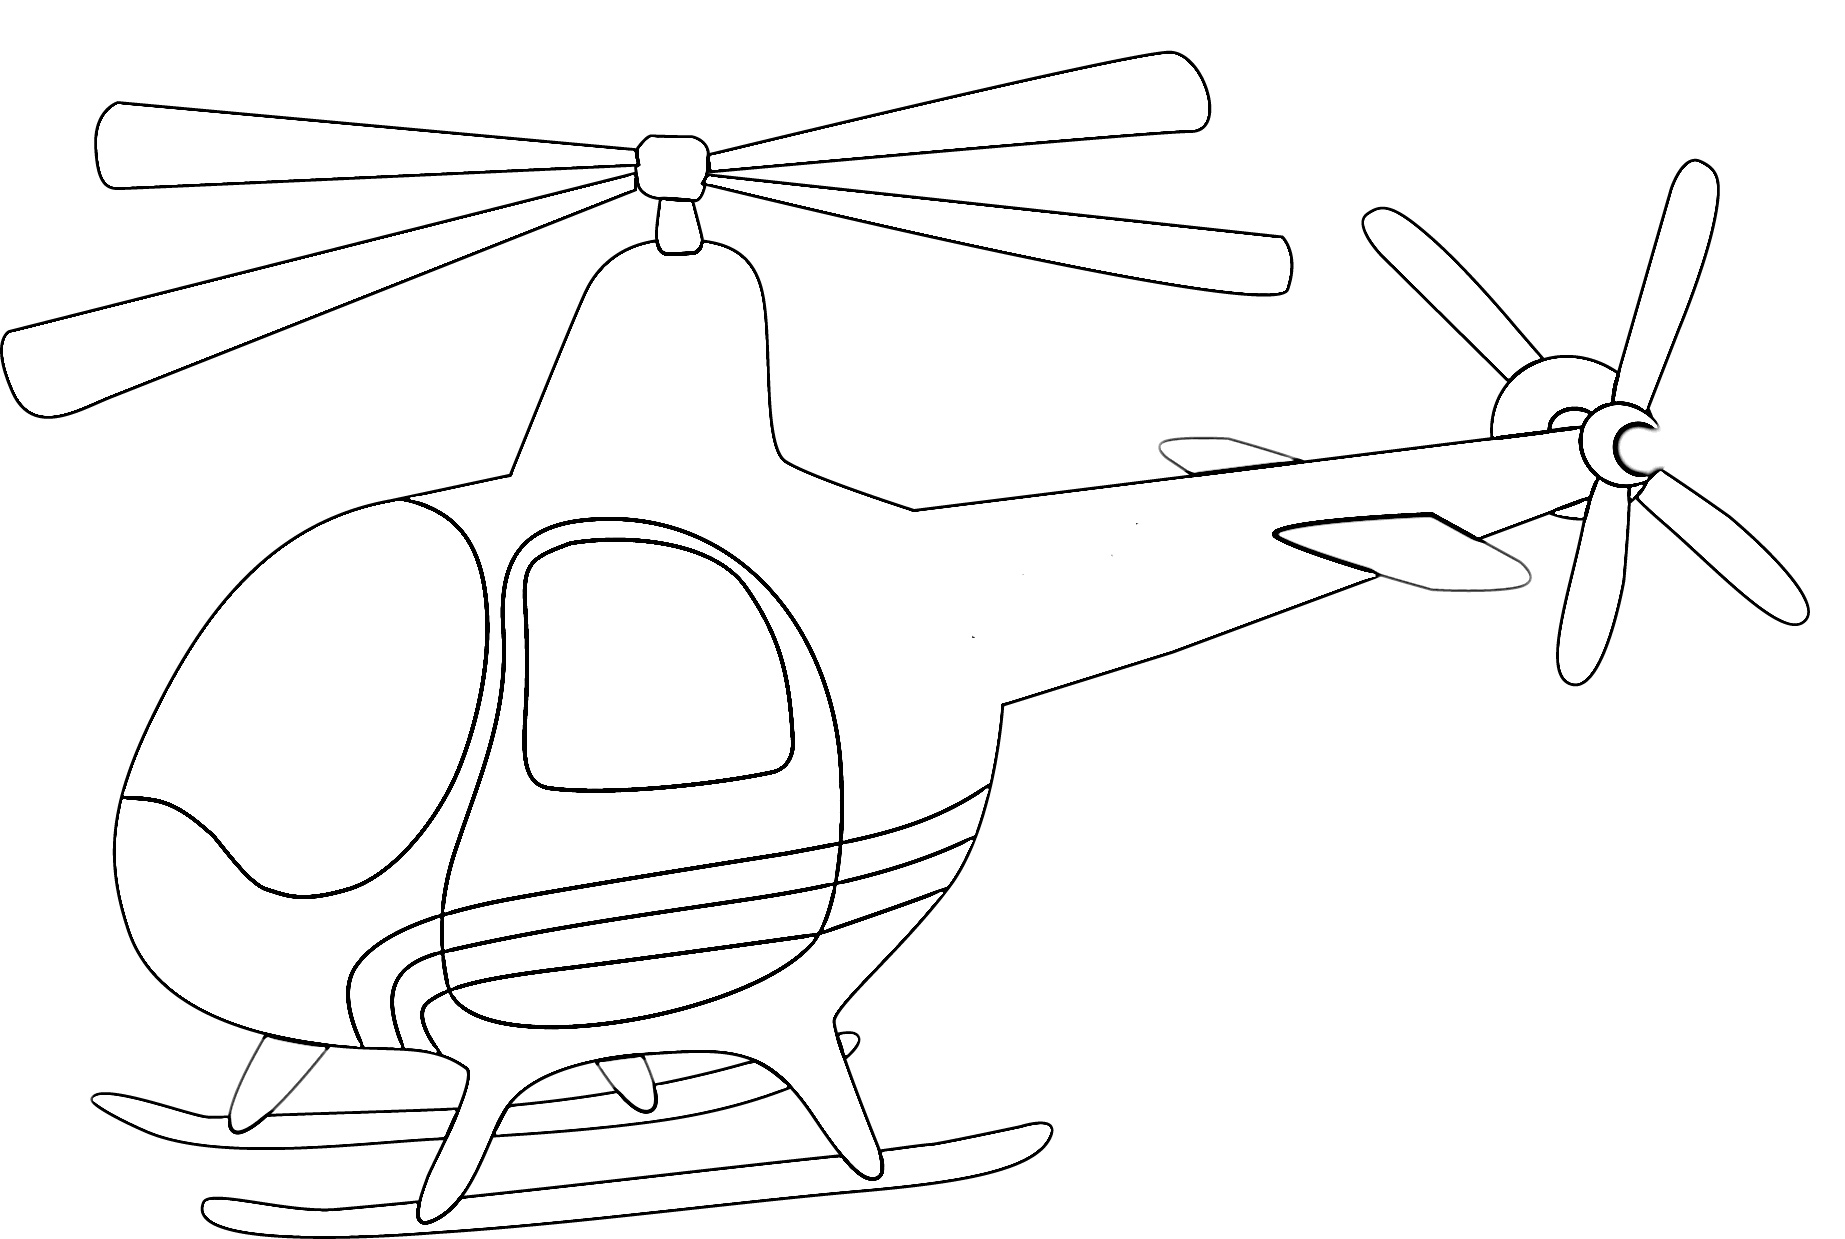 Cute helicopter cartoon coloring page